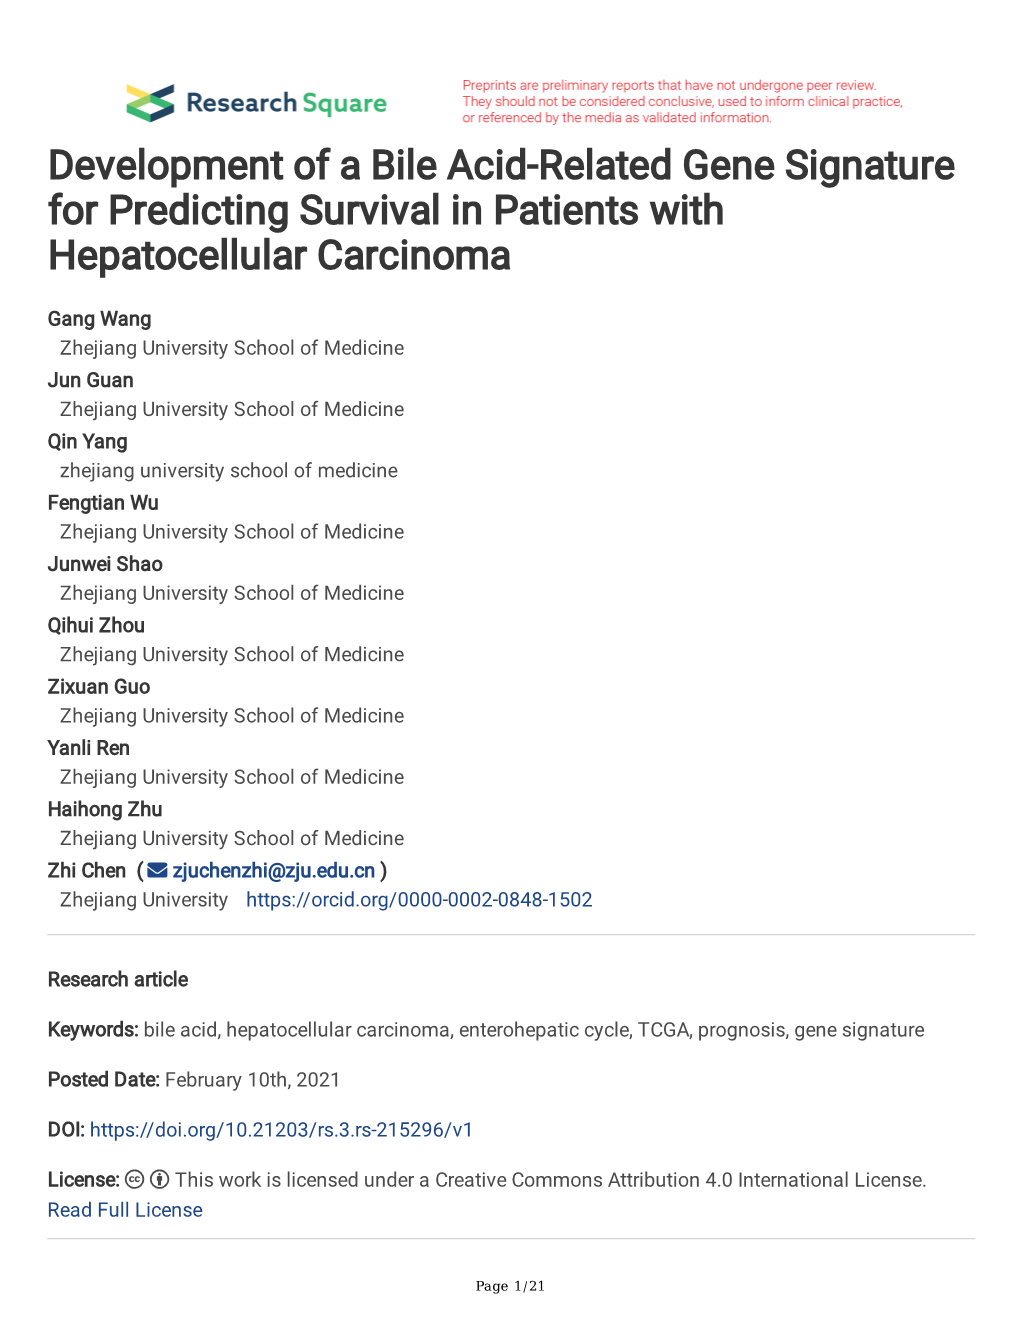 Development of a Bile Acid-Related Gene Signature for Predicting Survival in Patients with Hepatocellular Carcinoma